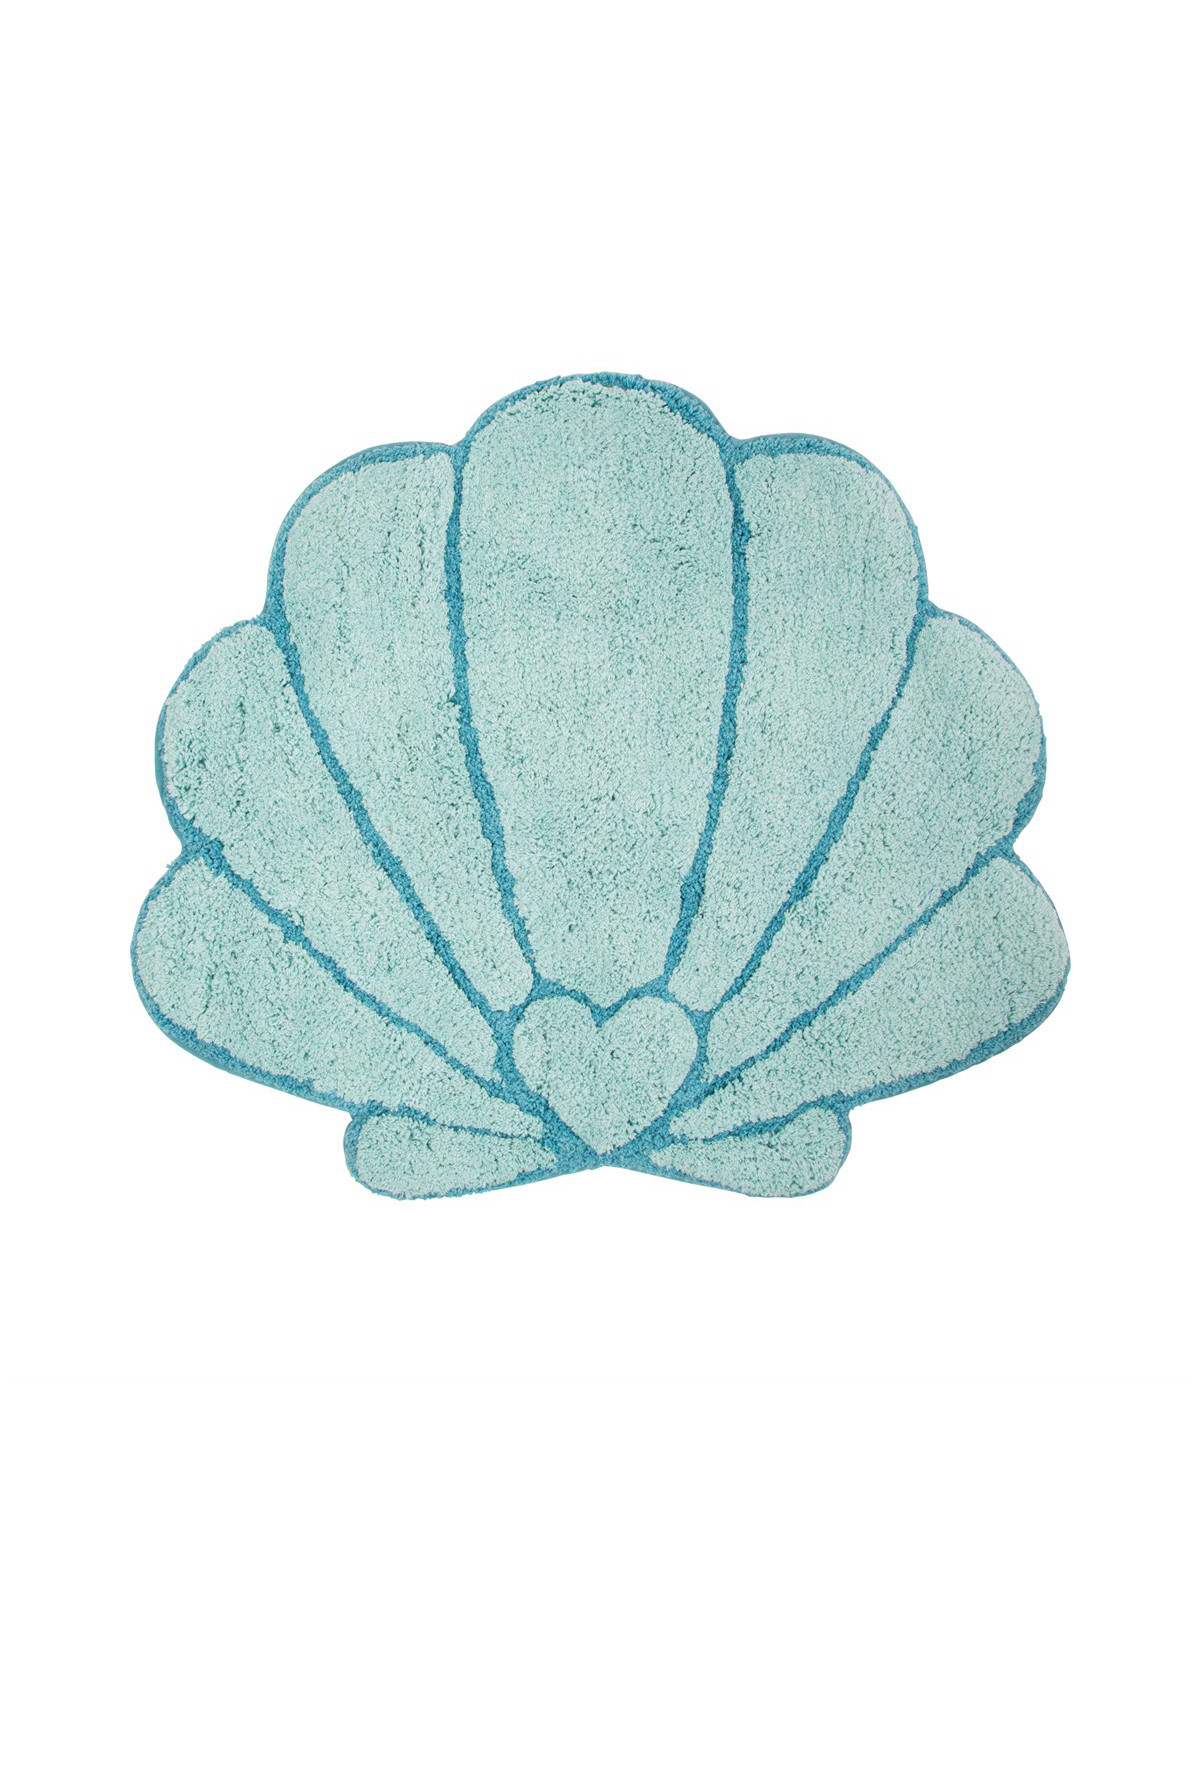 Mermaid Life Seashell Area Rug | Sincerely Sweet Boutique